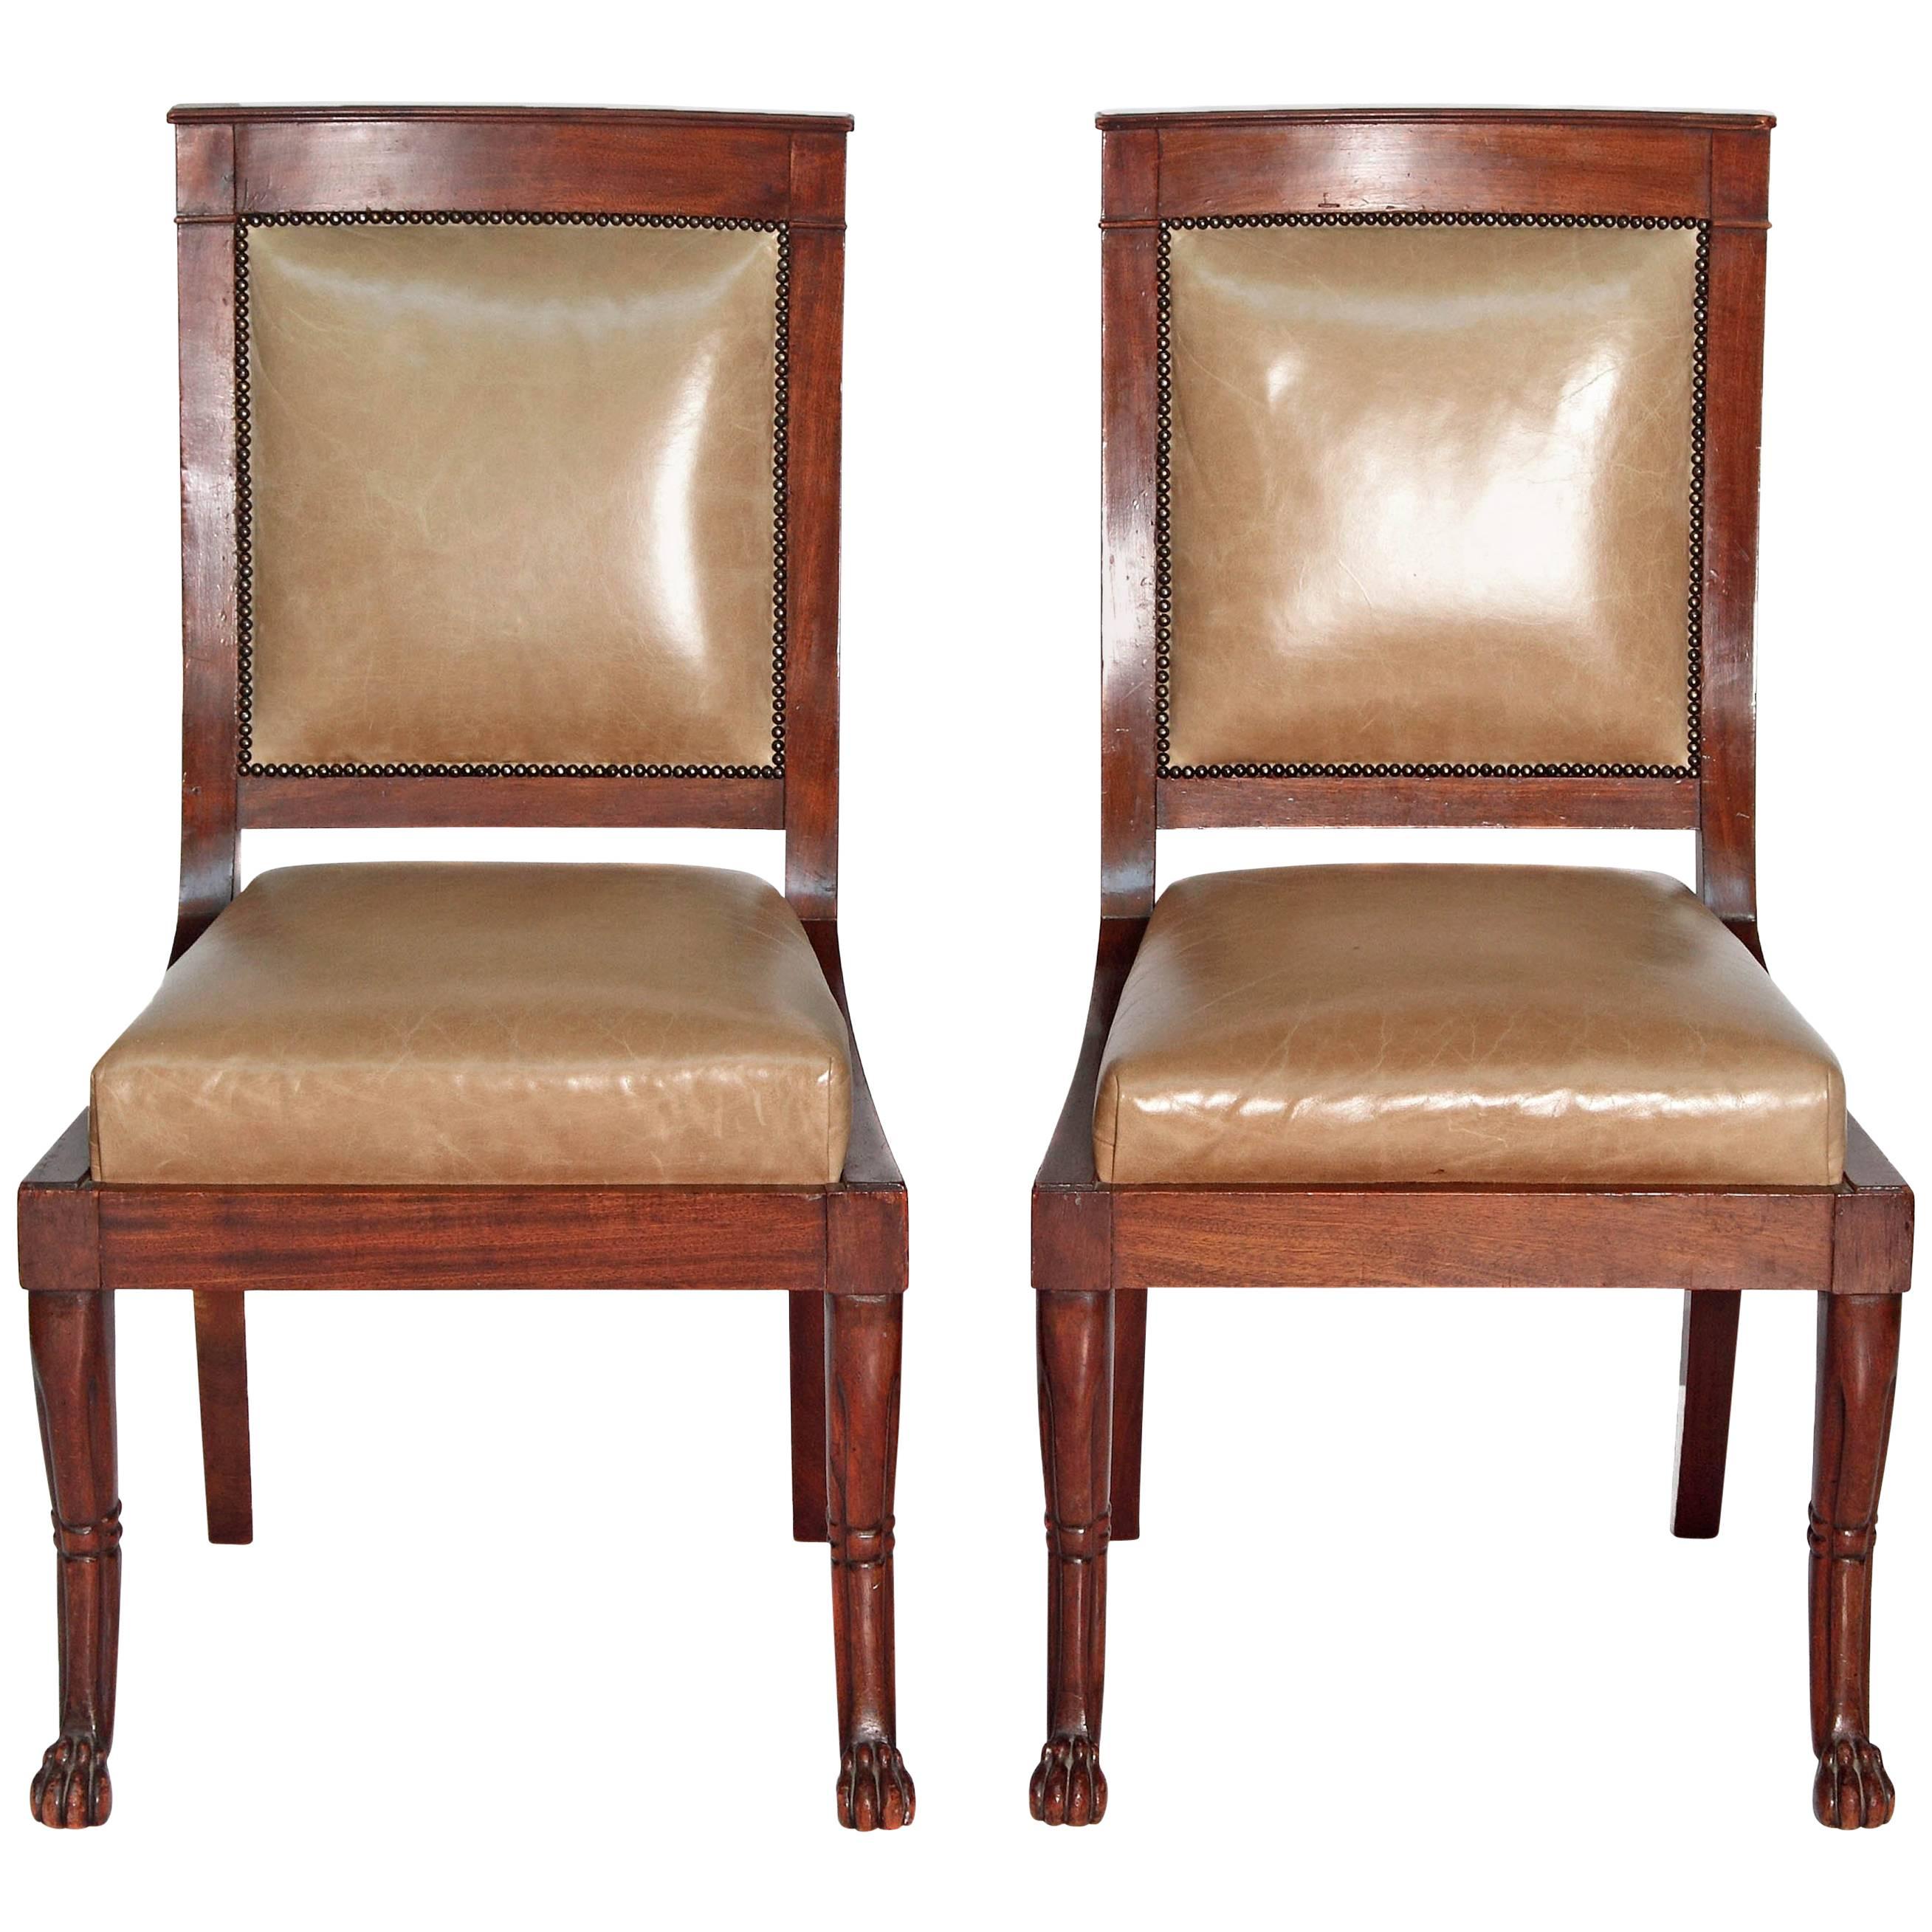 Pair of French Neoclassic Period Chairs